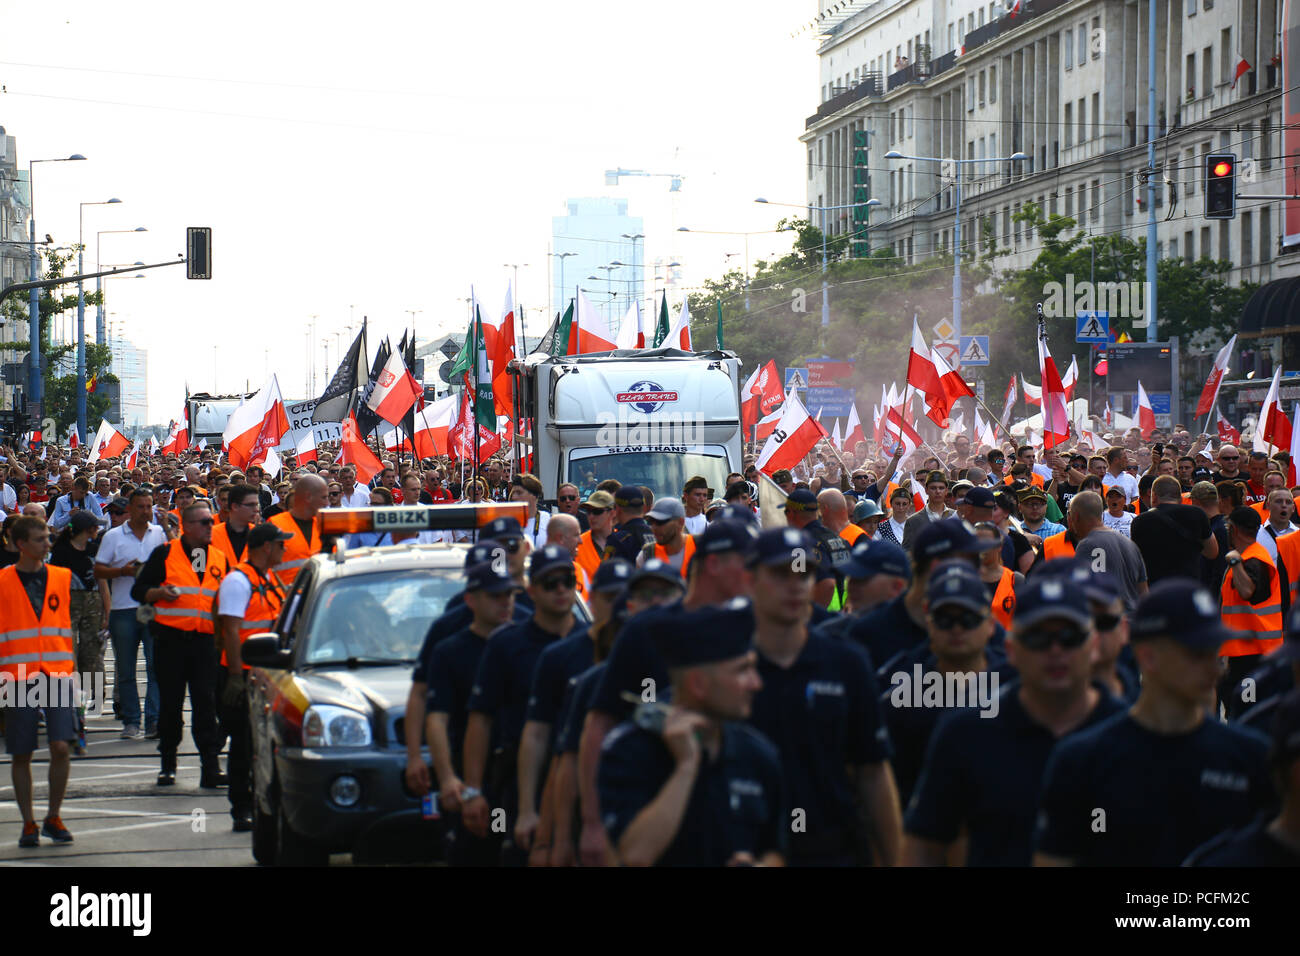 Poland, Warsaw, 1st August 2018: Celebrations on 74th anniversary of Warsaw Uprising in the center of Polish capitol. Masses of participants show flags and flare fires to remember of the city fighters of 1944 during World War II. ©Madeleine Ratz/Alamy Live News Stock Photo